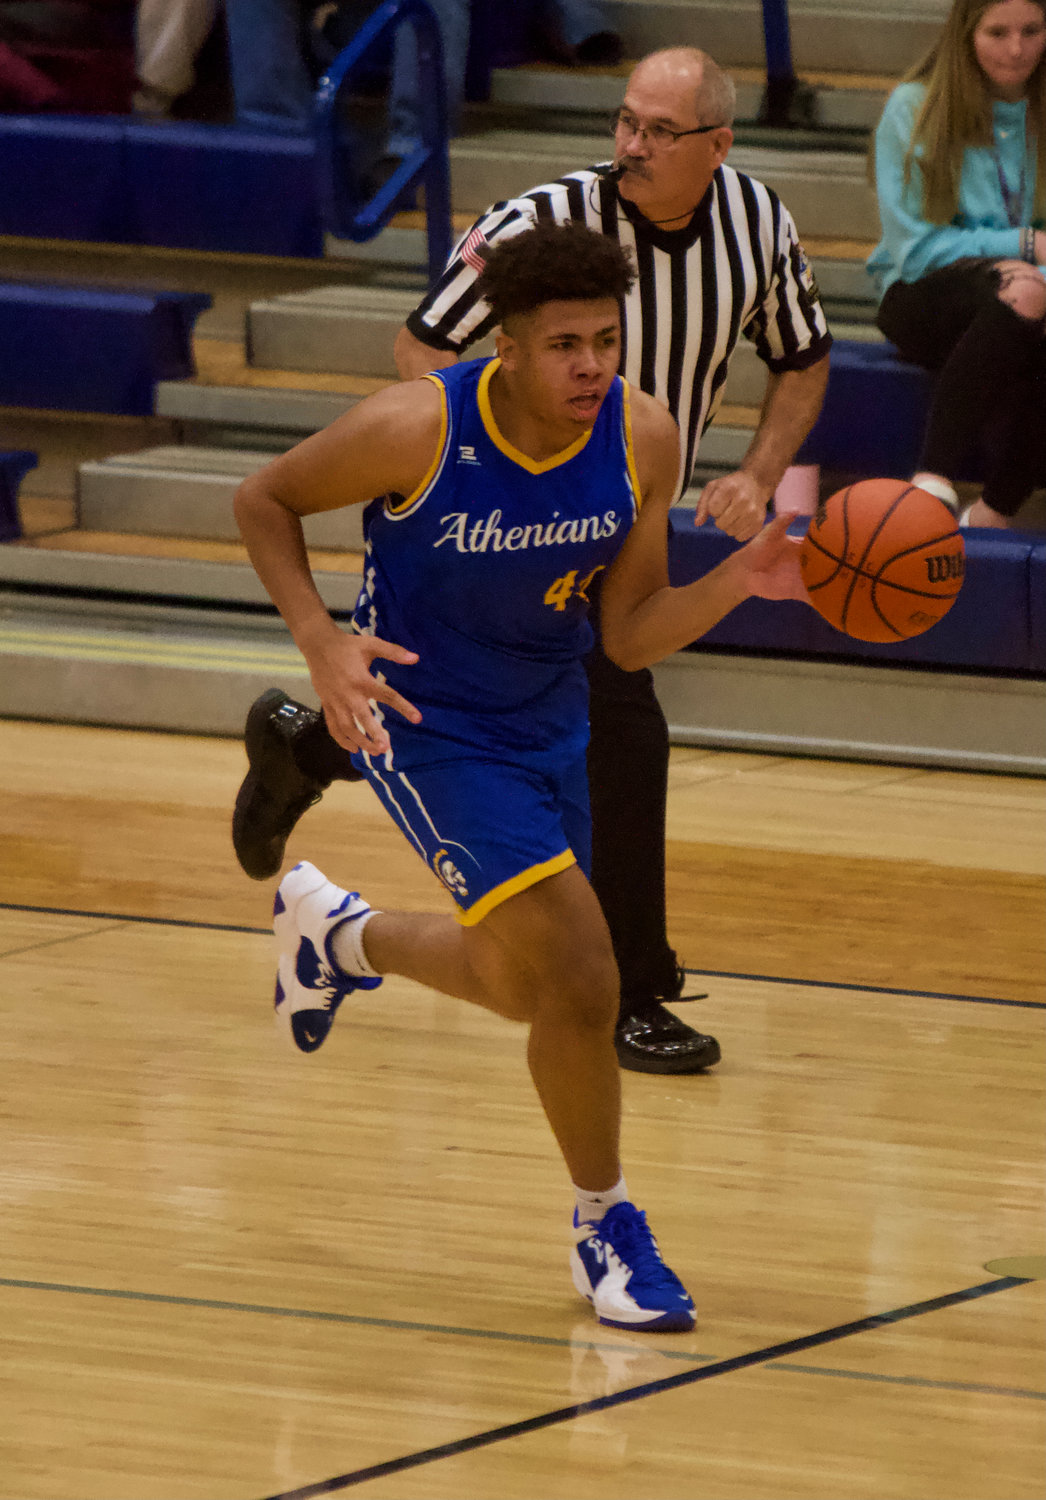 Mekhi Wallace led the way for Crawfordsville with 16 points and 10 rebounds in their 38-32 win over Fountain Central.